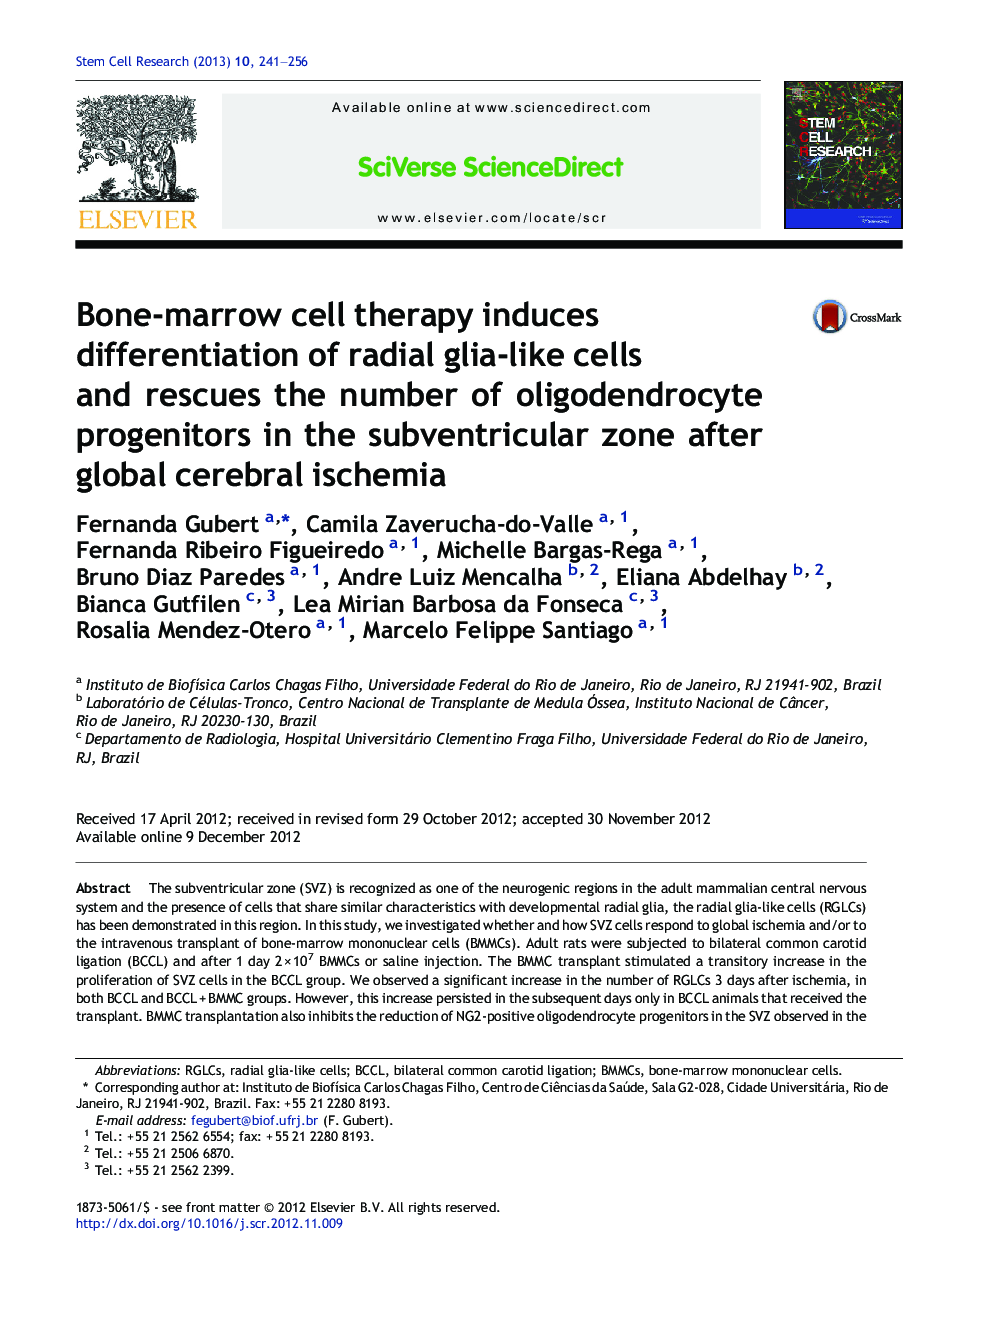 Bone-marrow cell therapy induces differentiation of radial glia-like cells and rescues the number of oligodendrocyte progenitors in the subventricular zone after global cerebral ischemia